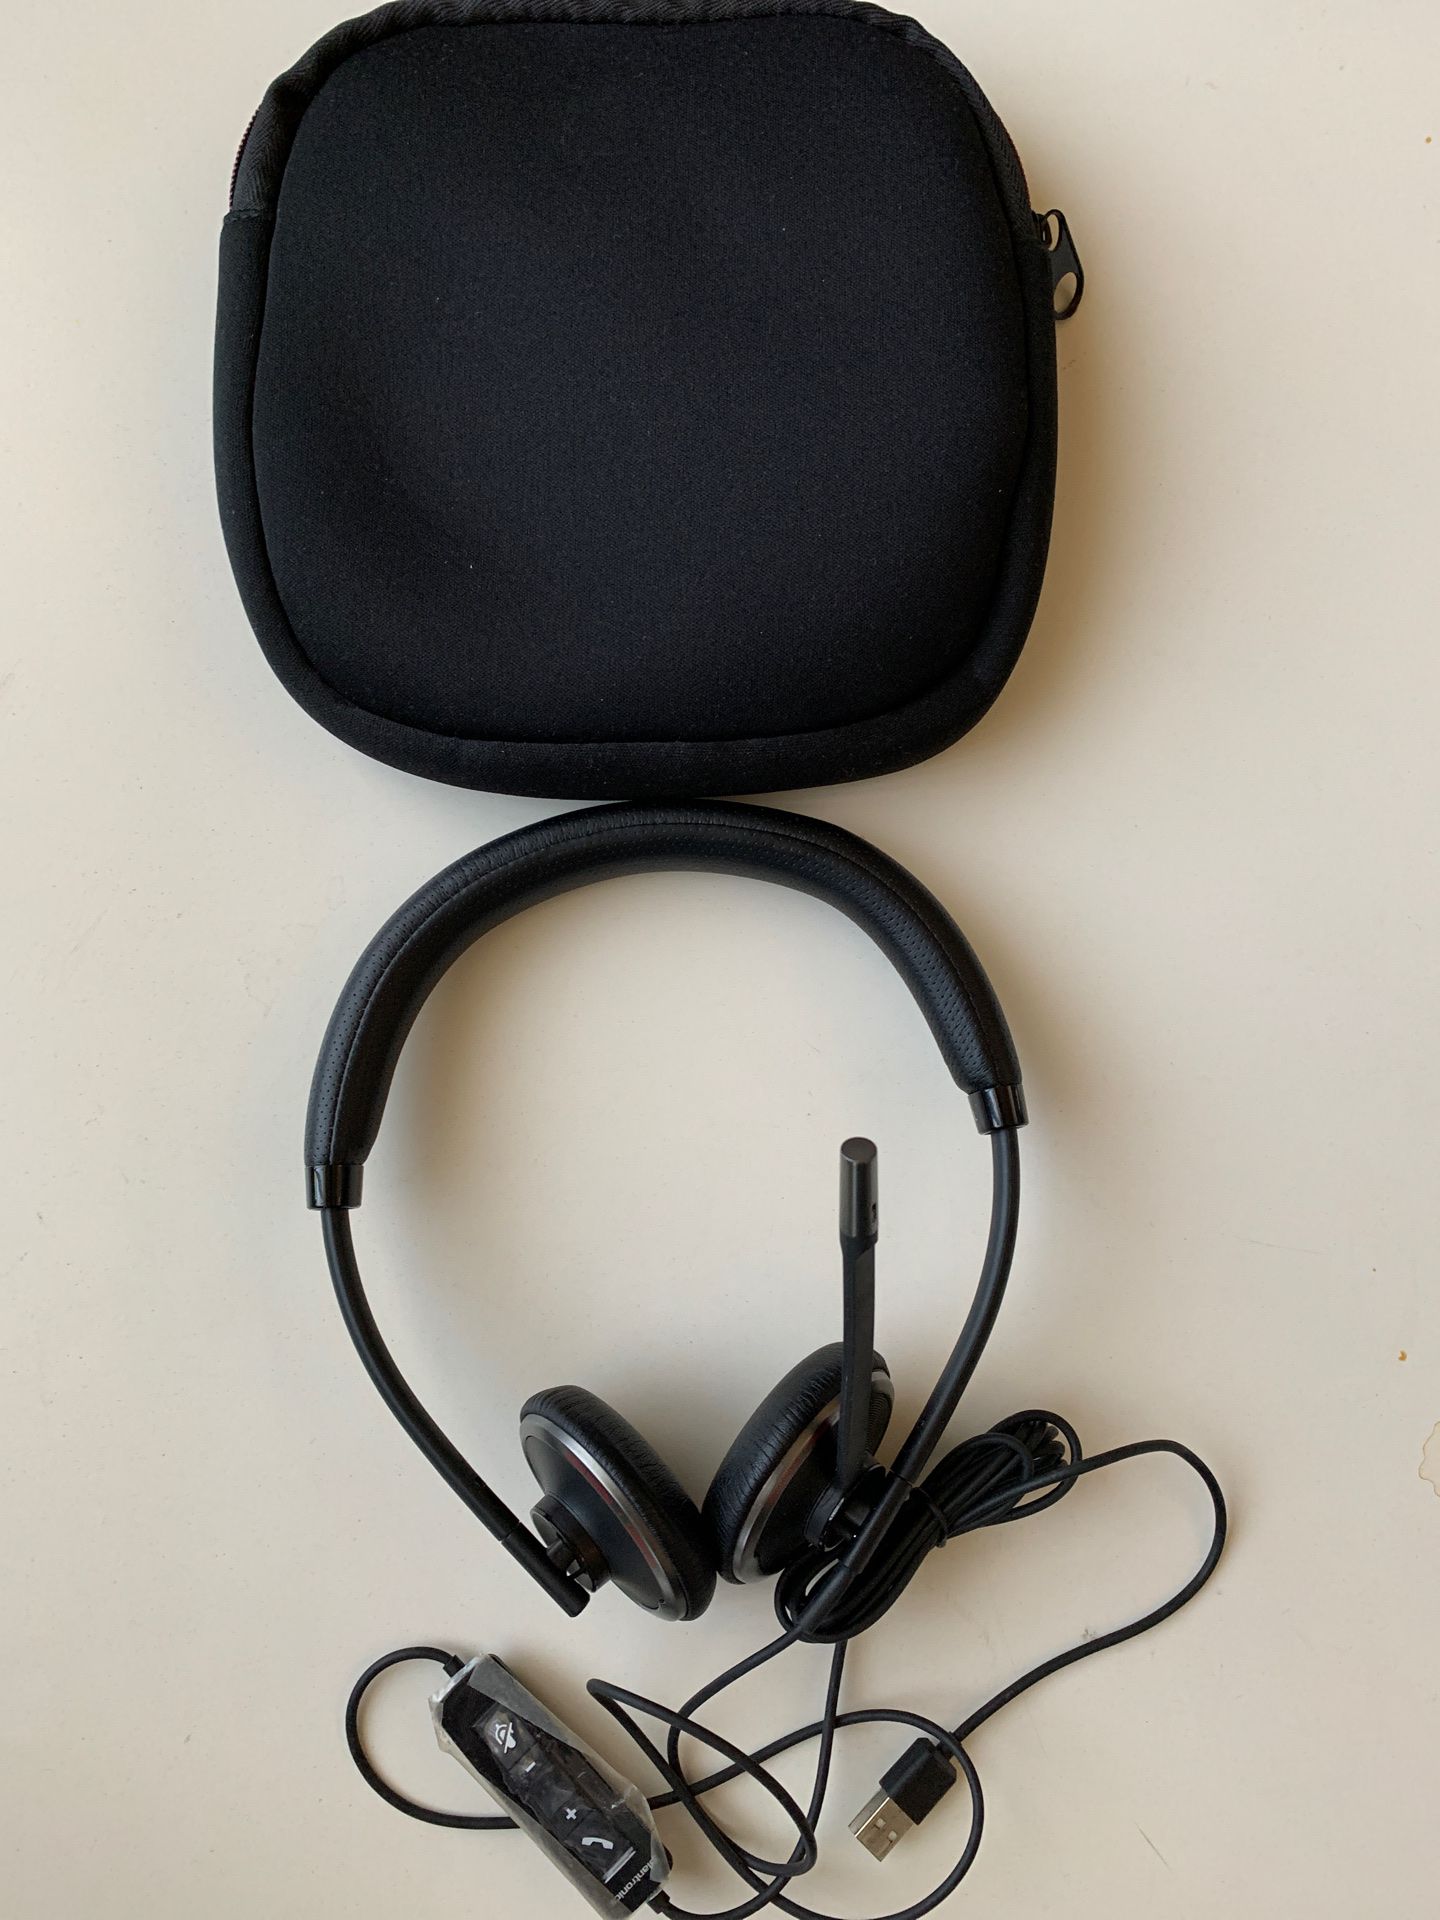 Plantronics blackwire C520 headset with mic and USB headphones rarely used with case